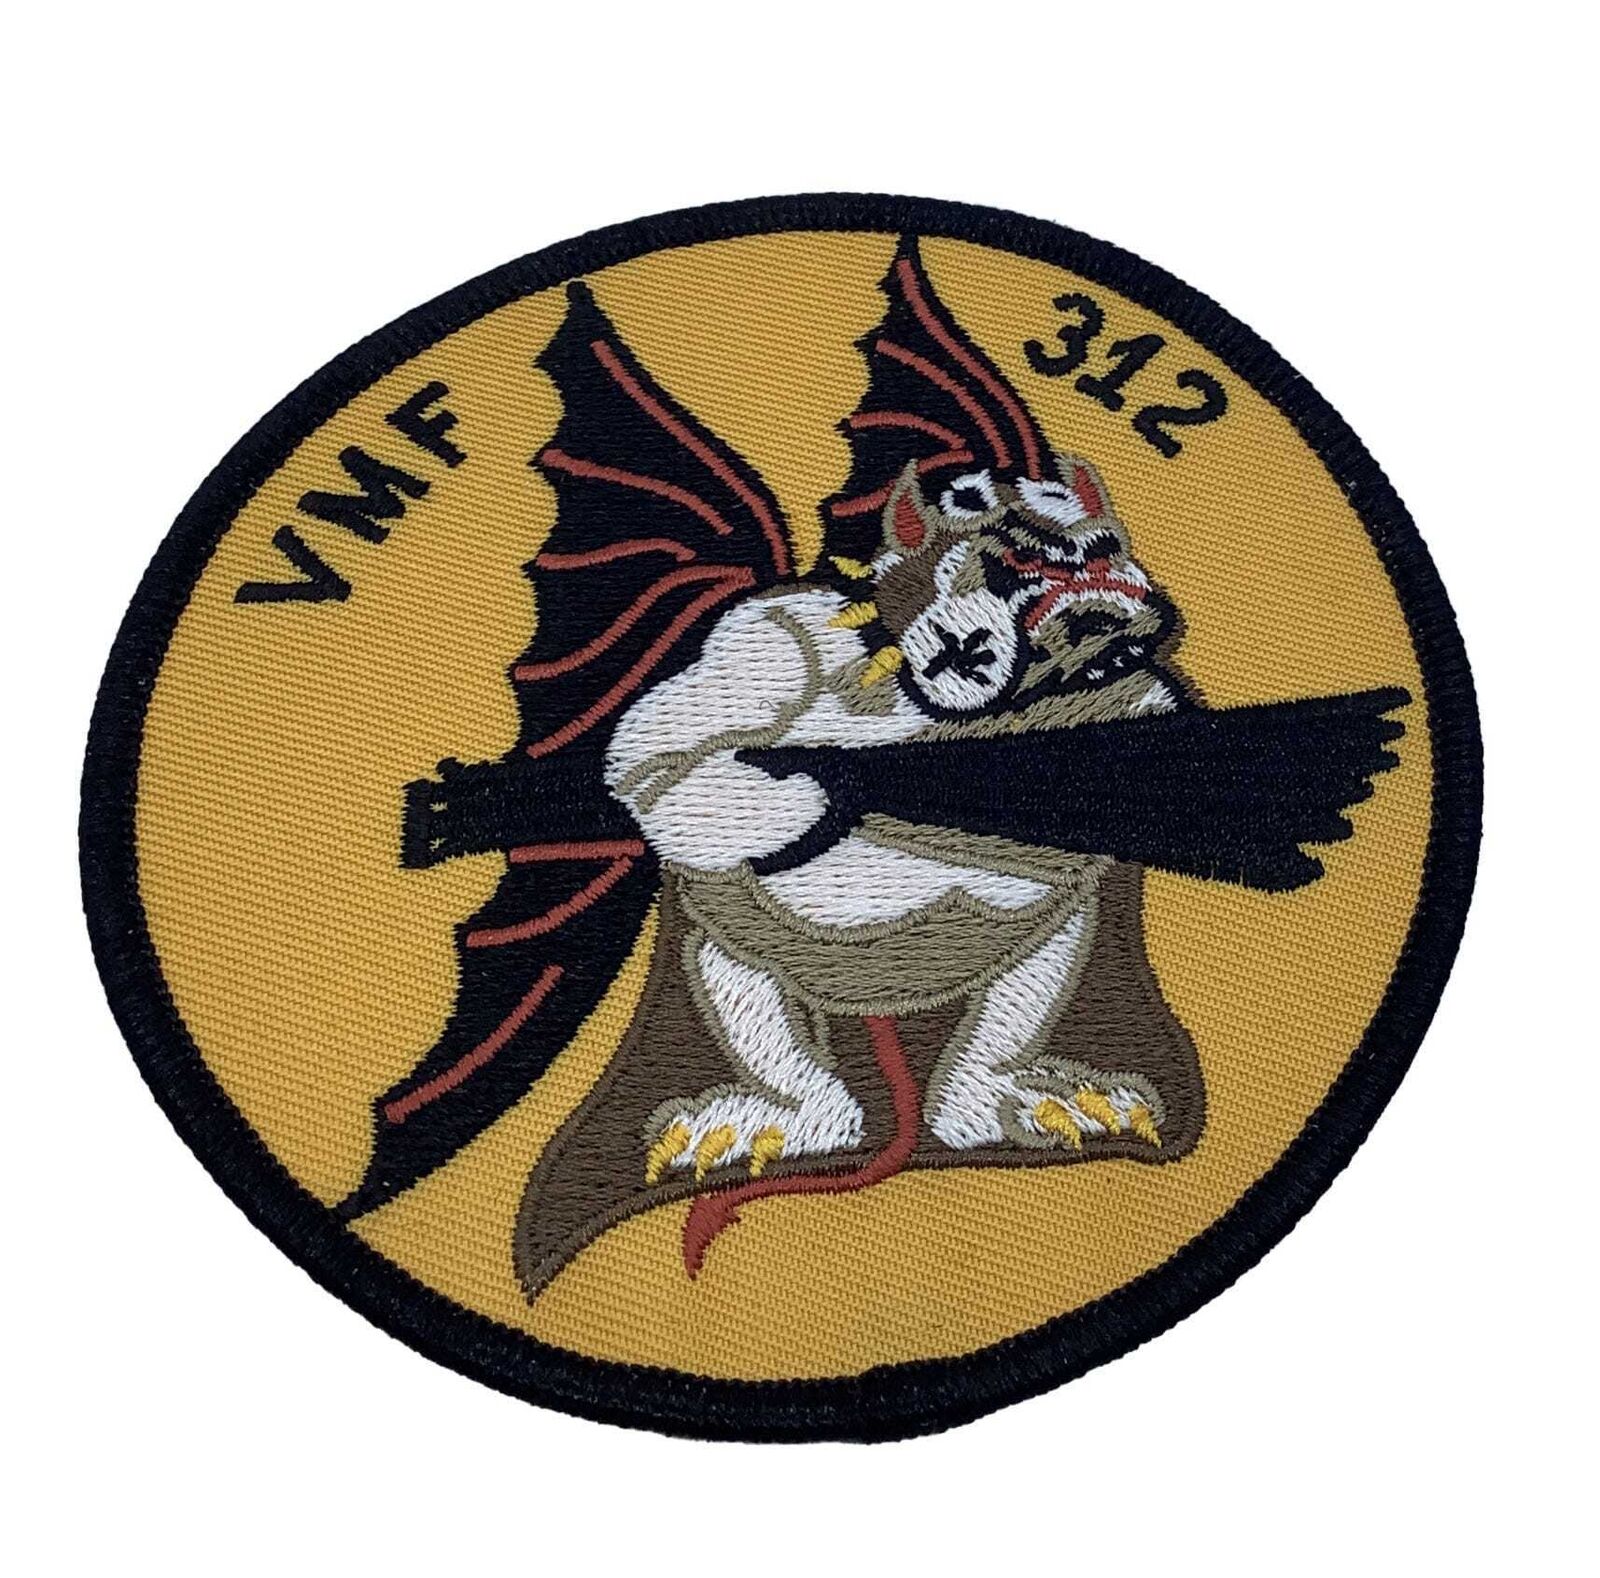 VMF-312 Checkerboards Patch- Plastic Backing